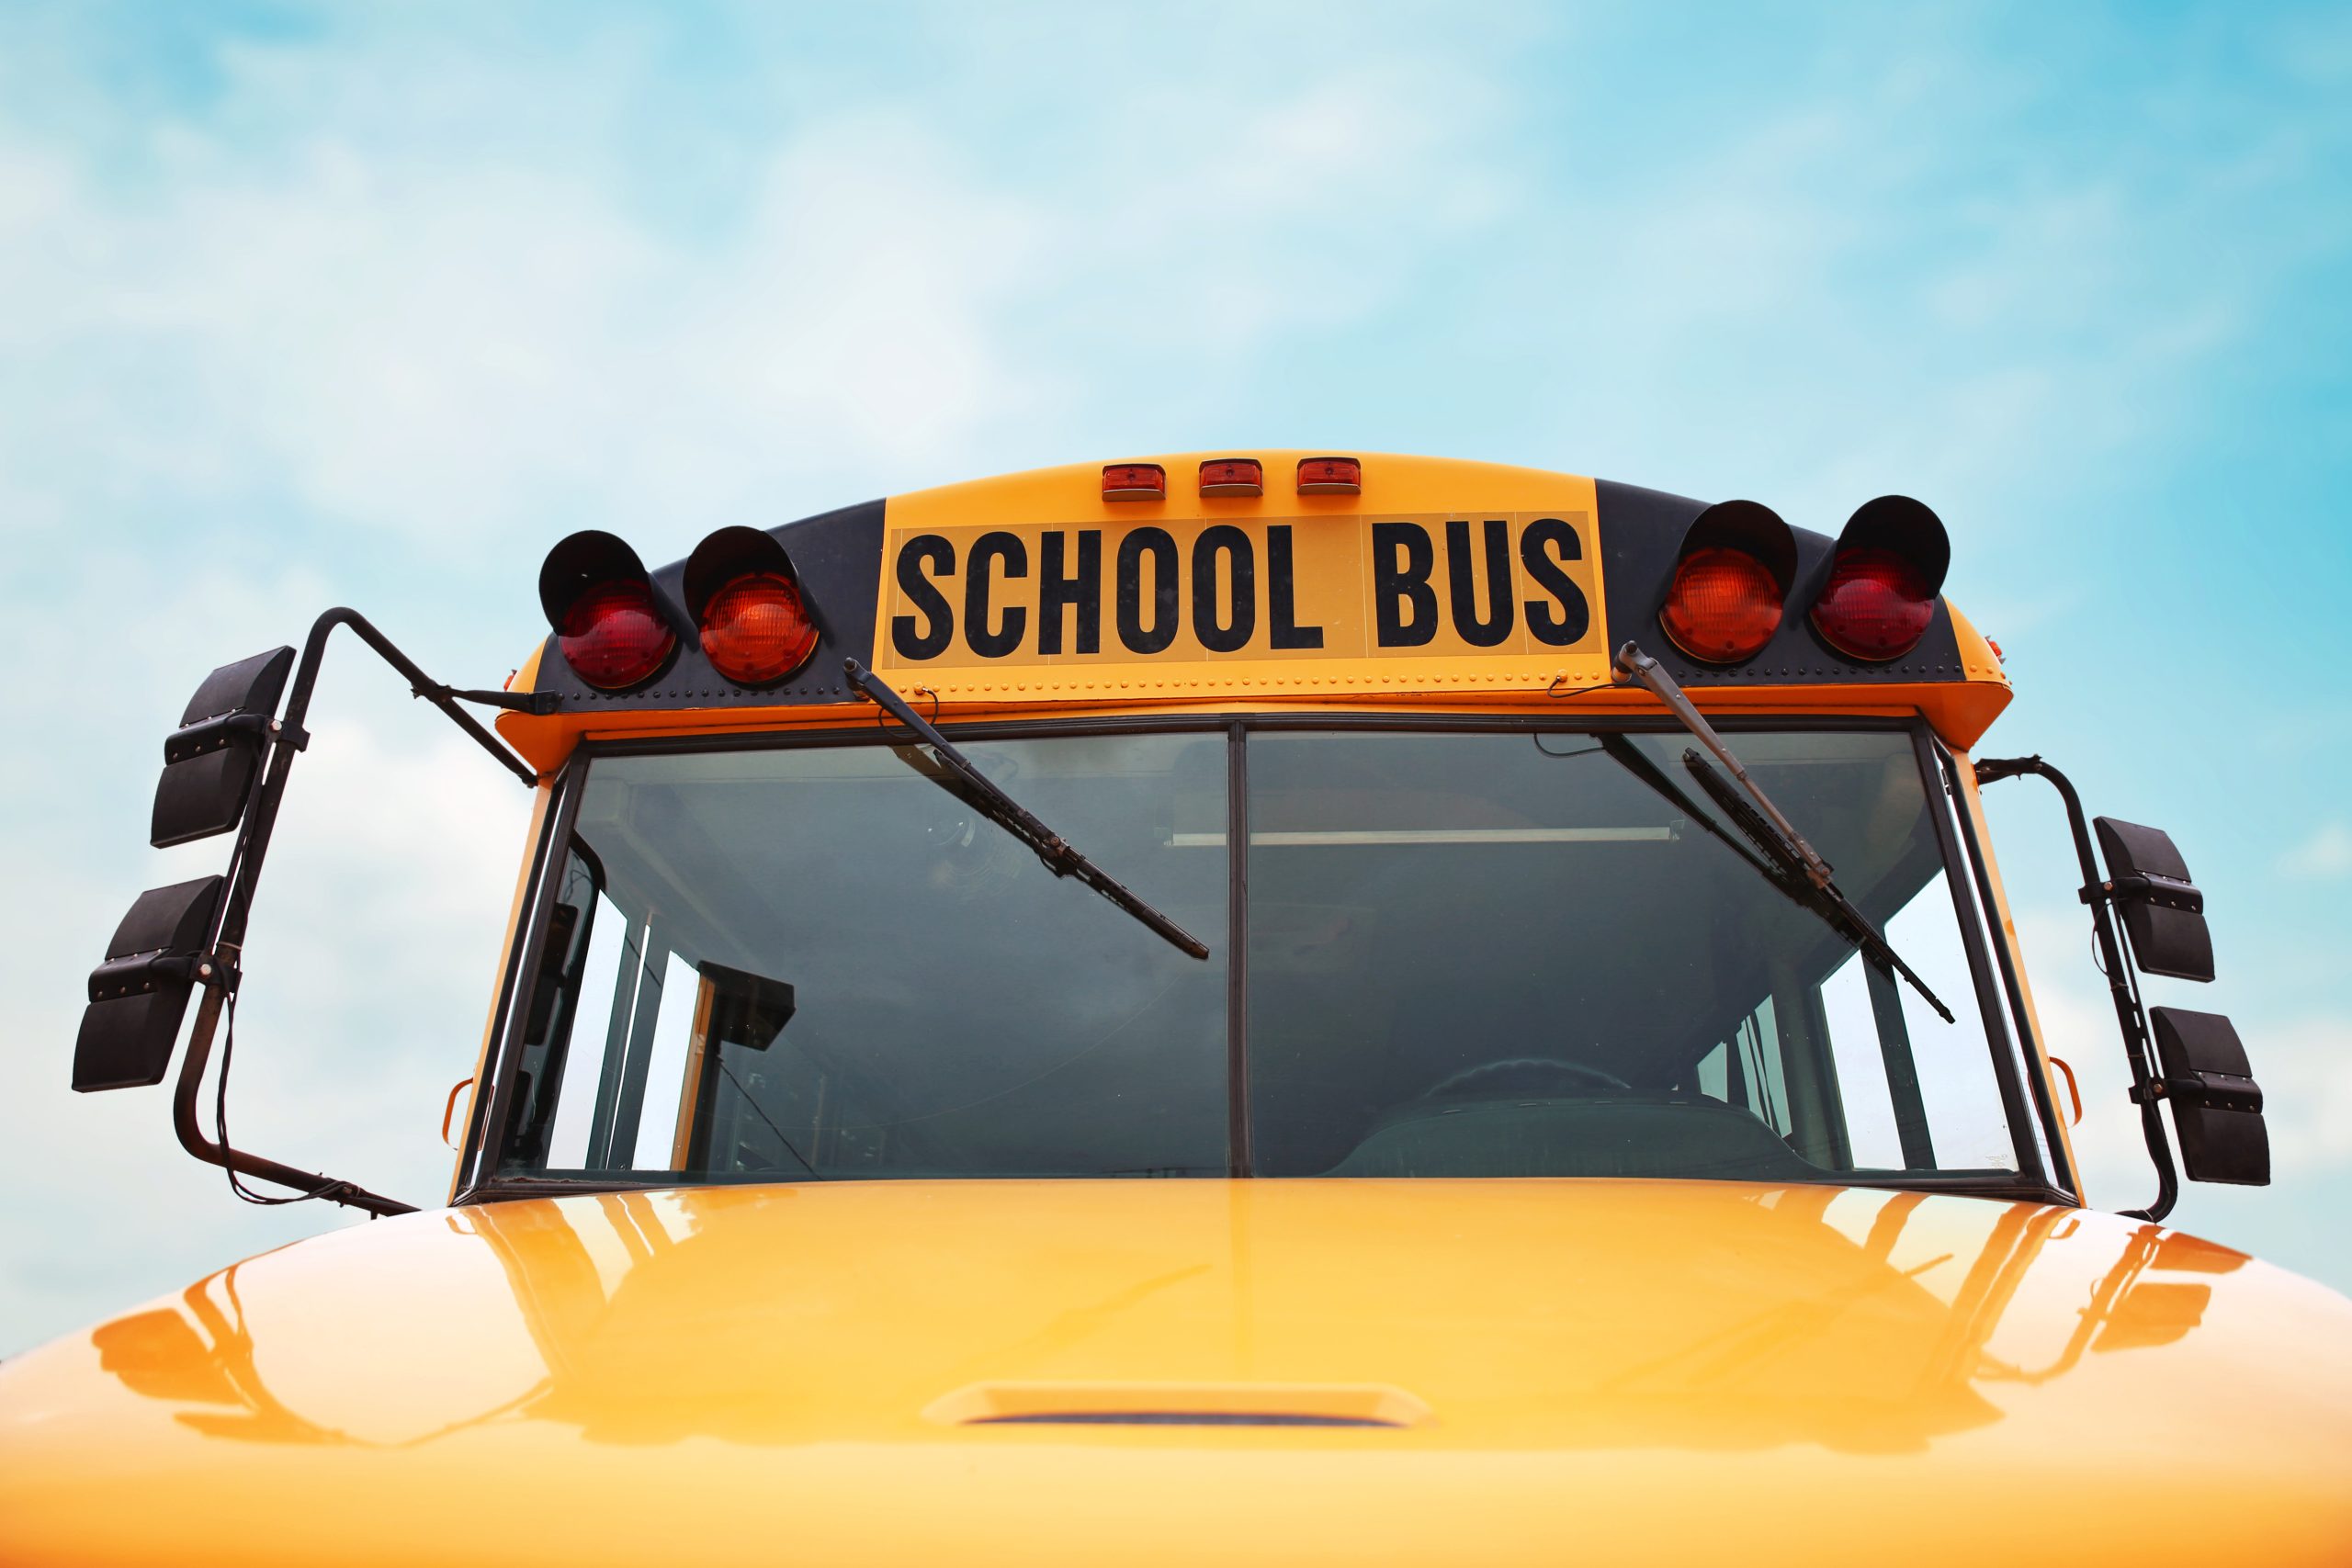 Cooper and Friedman have been providing quality personal injury and motor vehicle collision legal services since 1991, including school bus crashes.